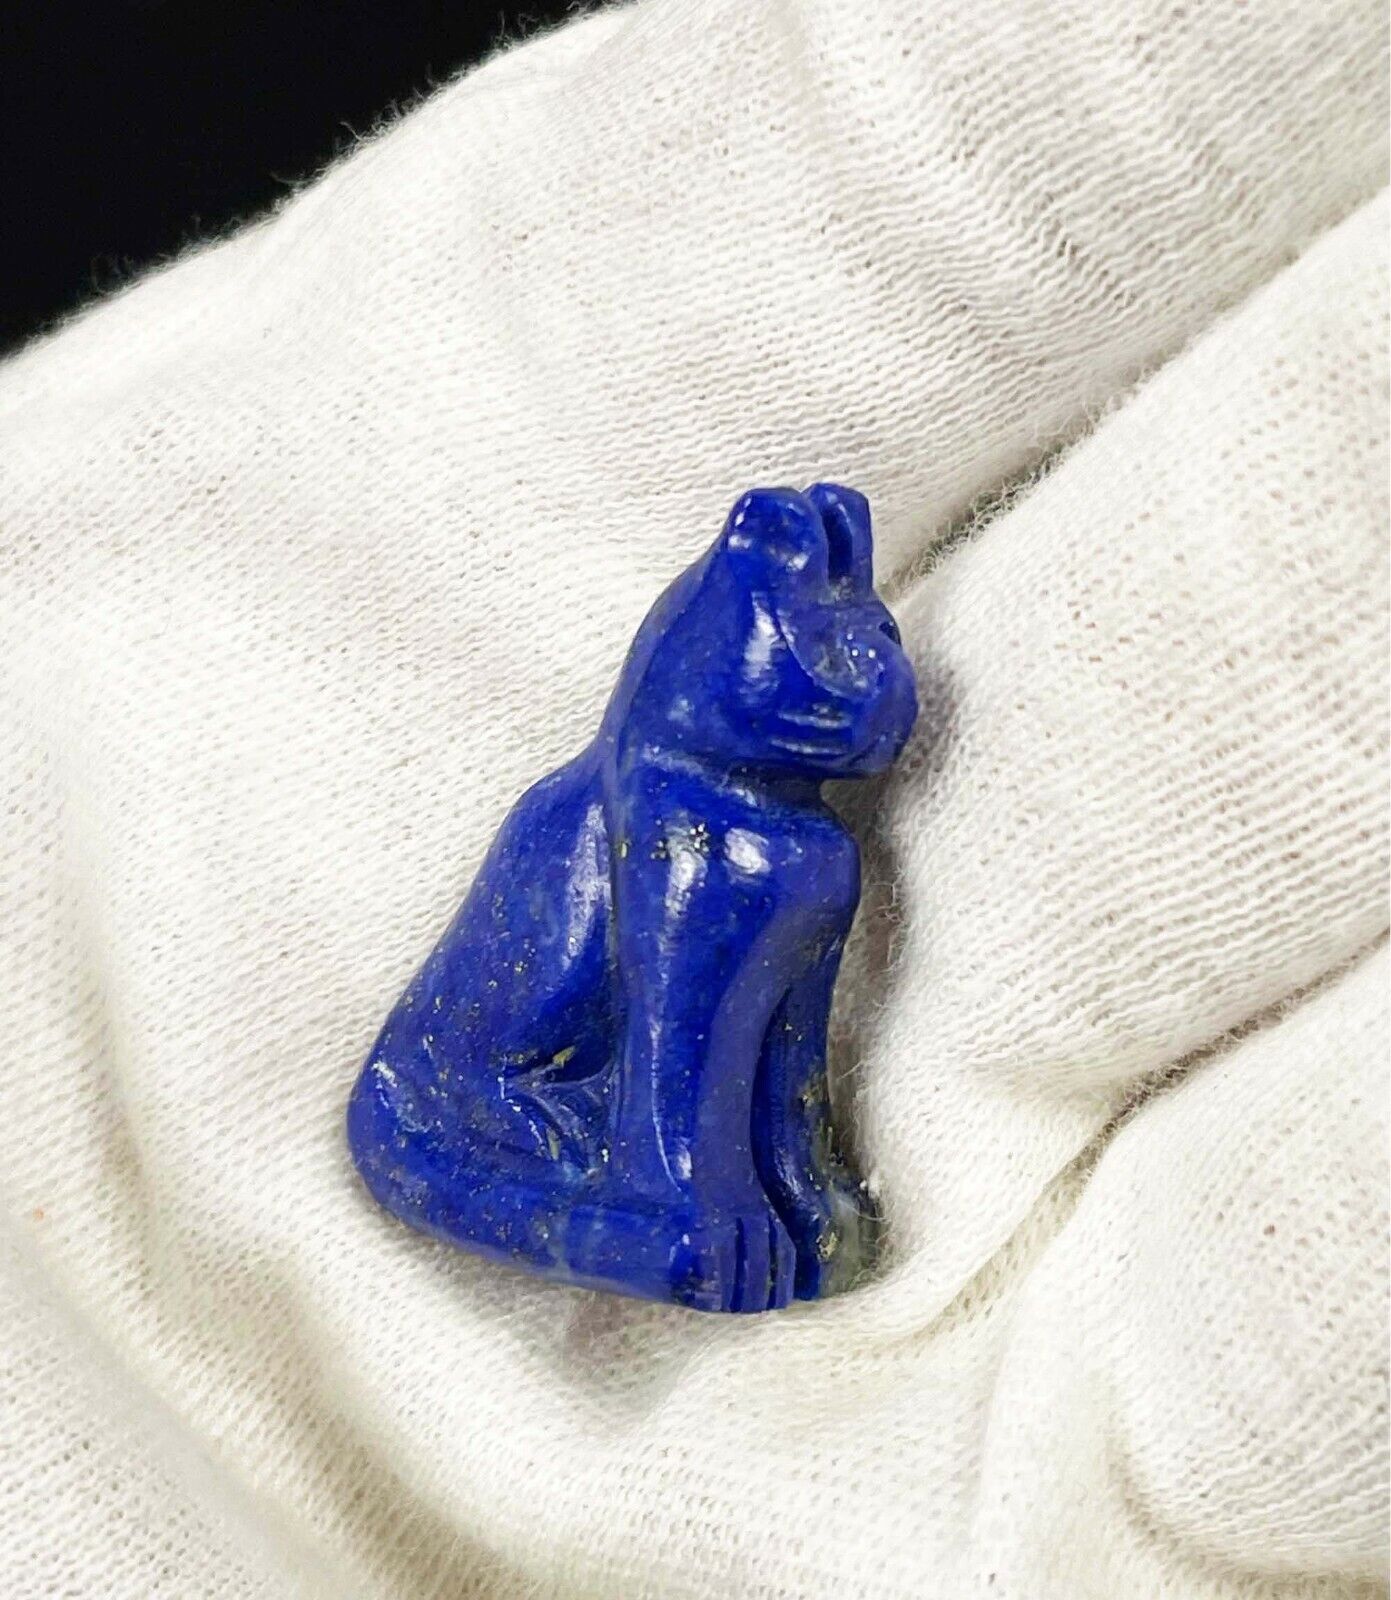 Very small Amazing BASTET goddess of protection to protect your home